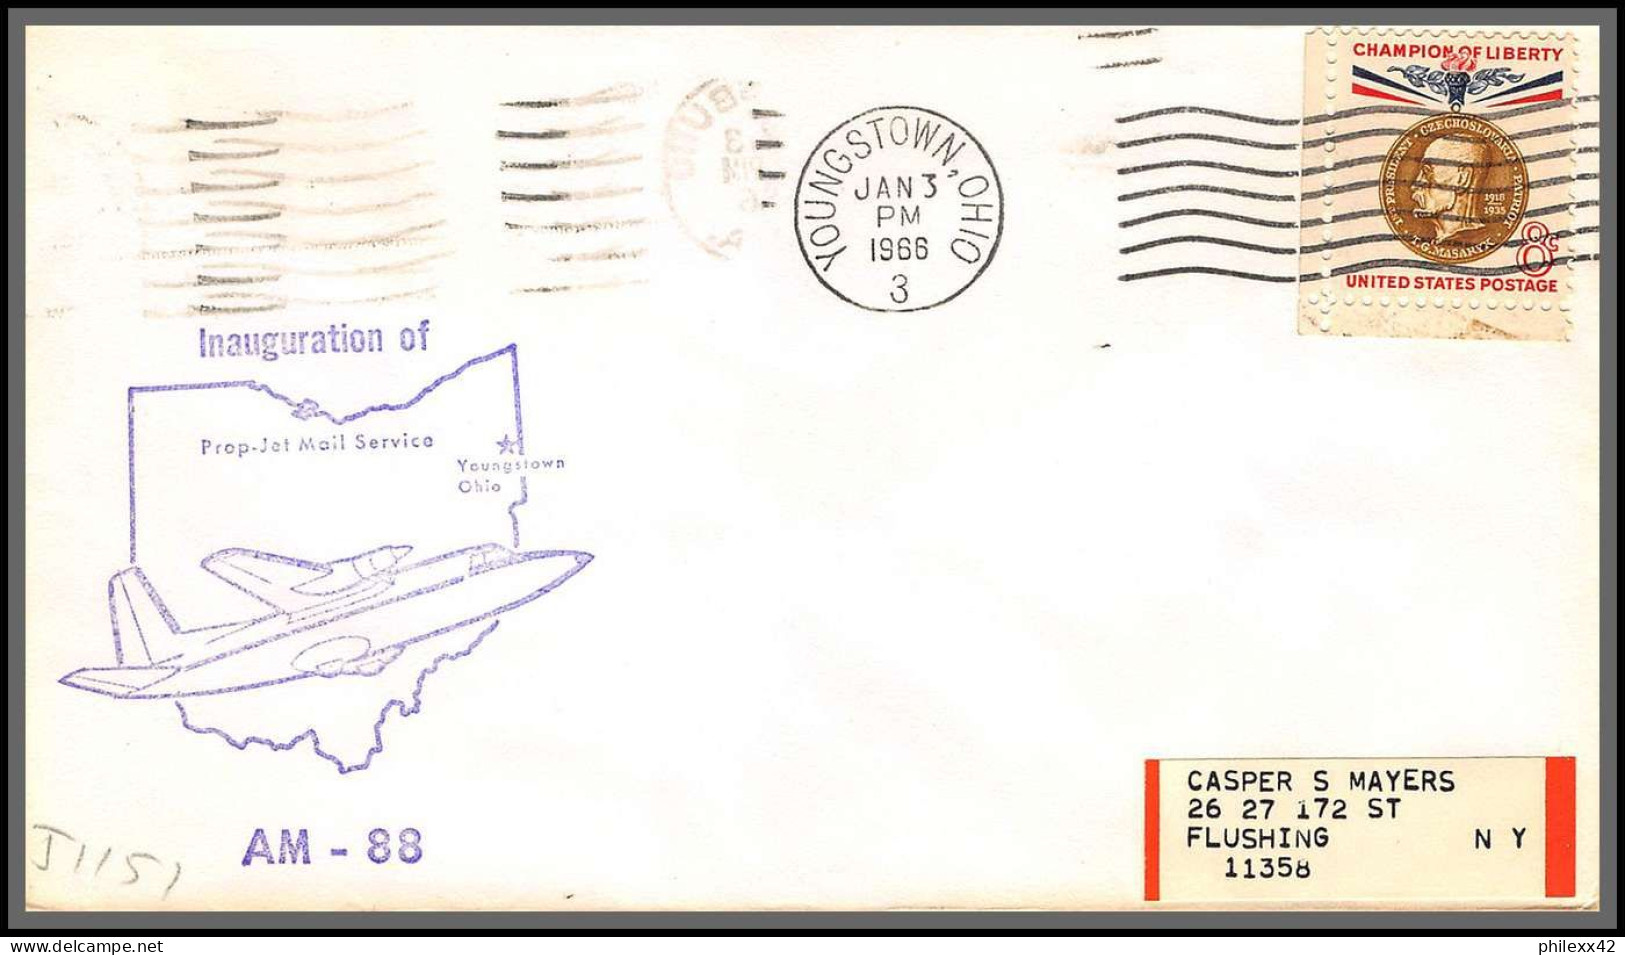 12437 Am 88 Inauguration Prop Jet Mail Service Youngstown 3/1/1966 Premier Vol First Flight Lettre Airmail Cover Usa  - 3c. 1961-... Covers